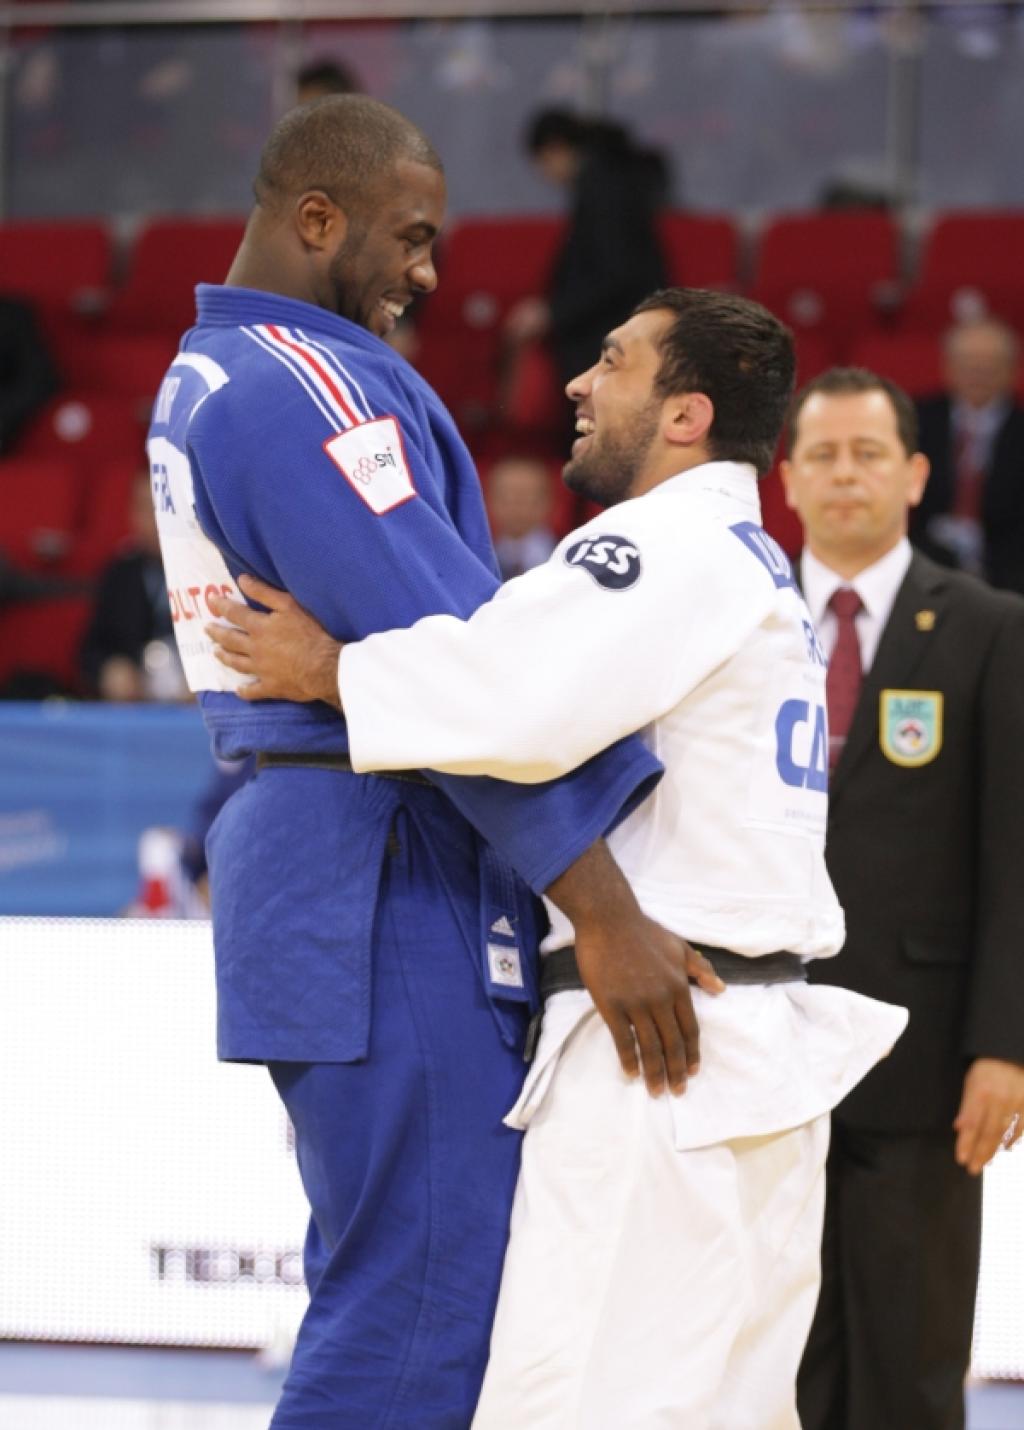 EJU takes over 'white judogi first' change